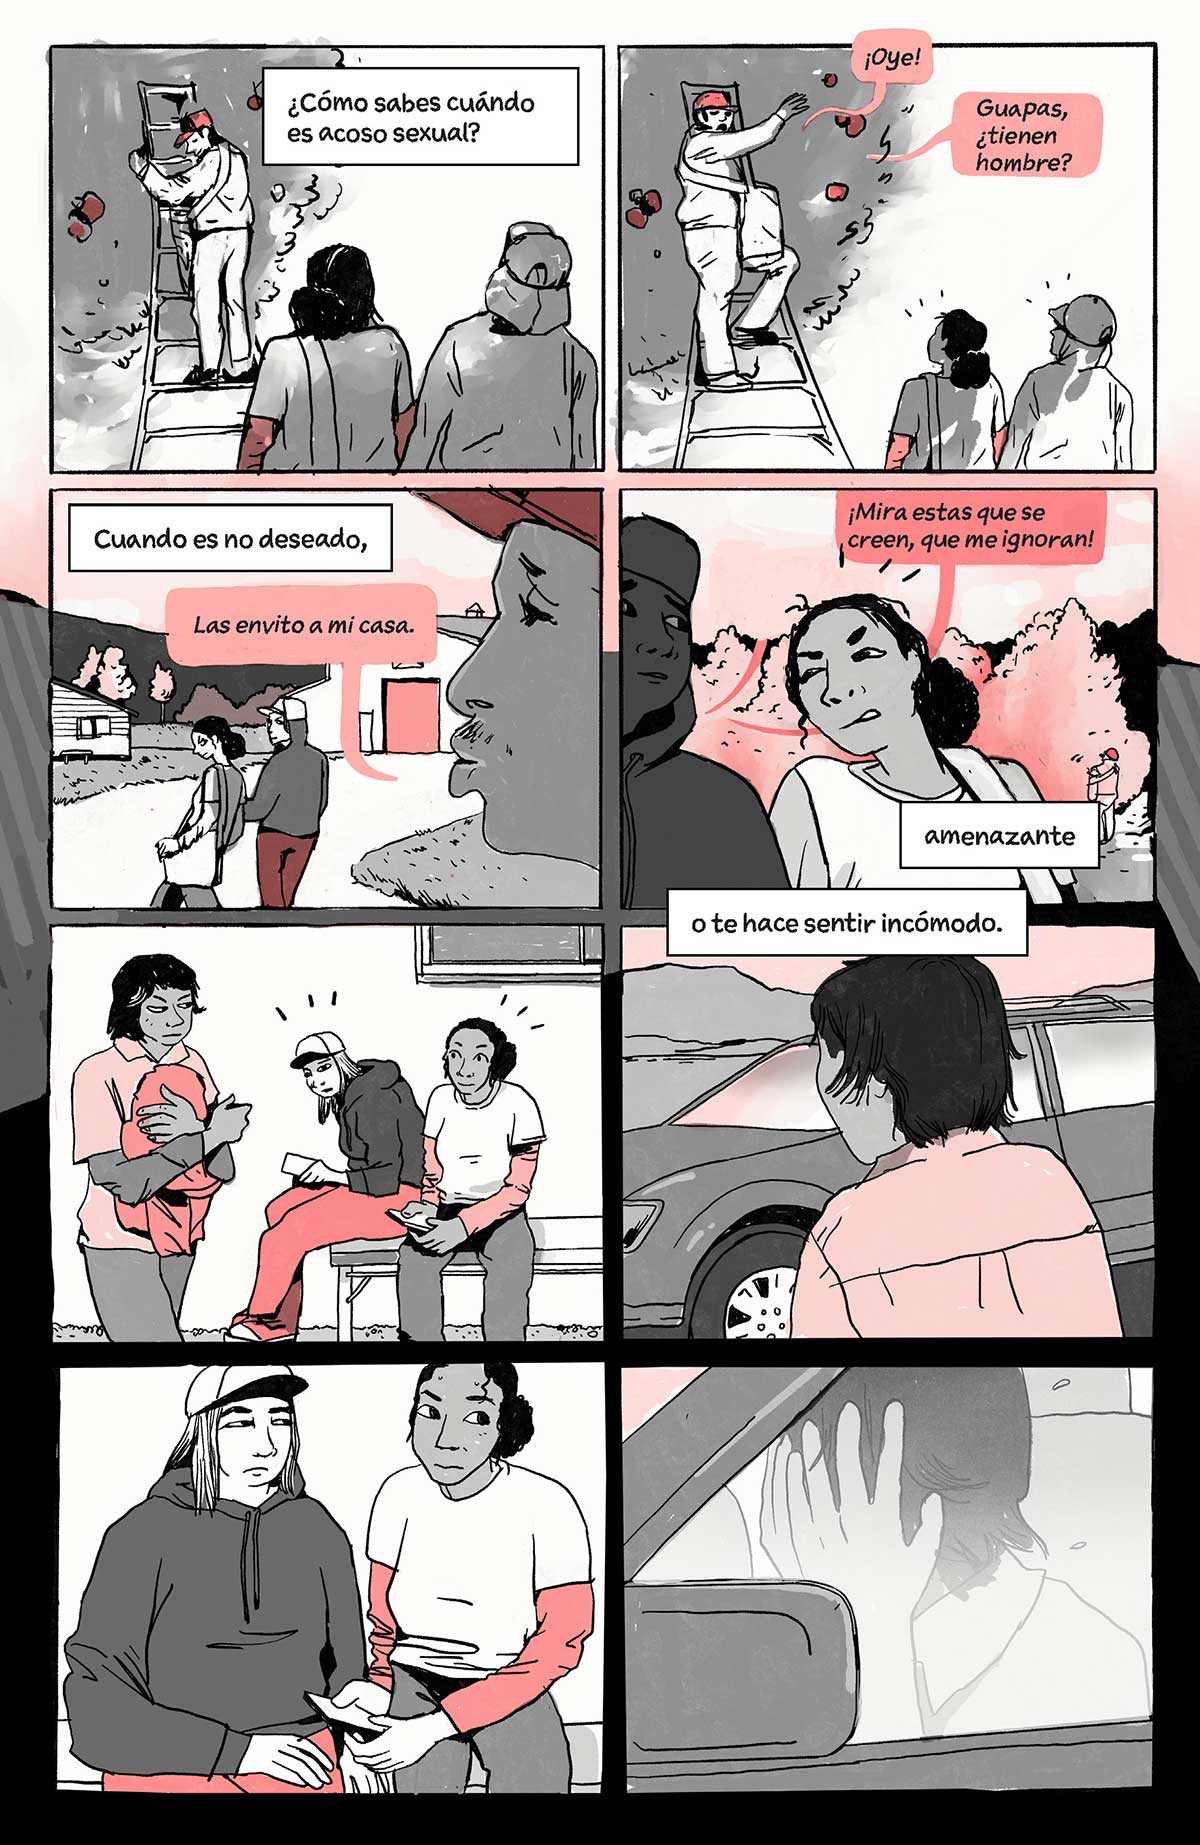 comic page by Myra Lara showing guidebook for ending sexual harassment for agriculture workers